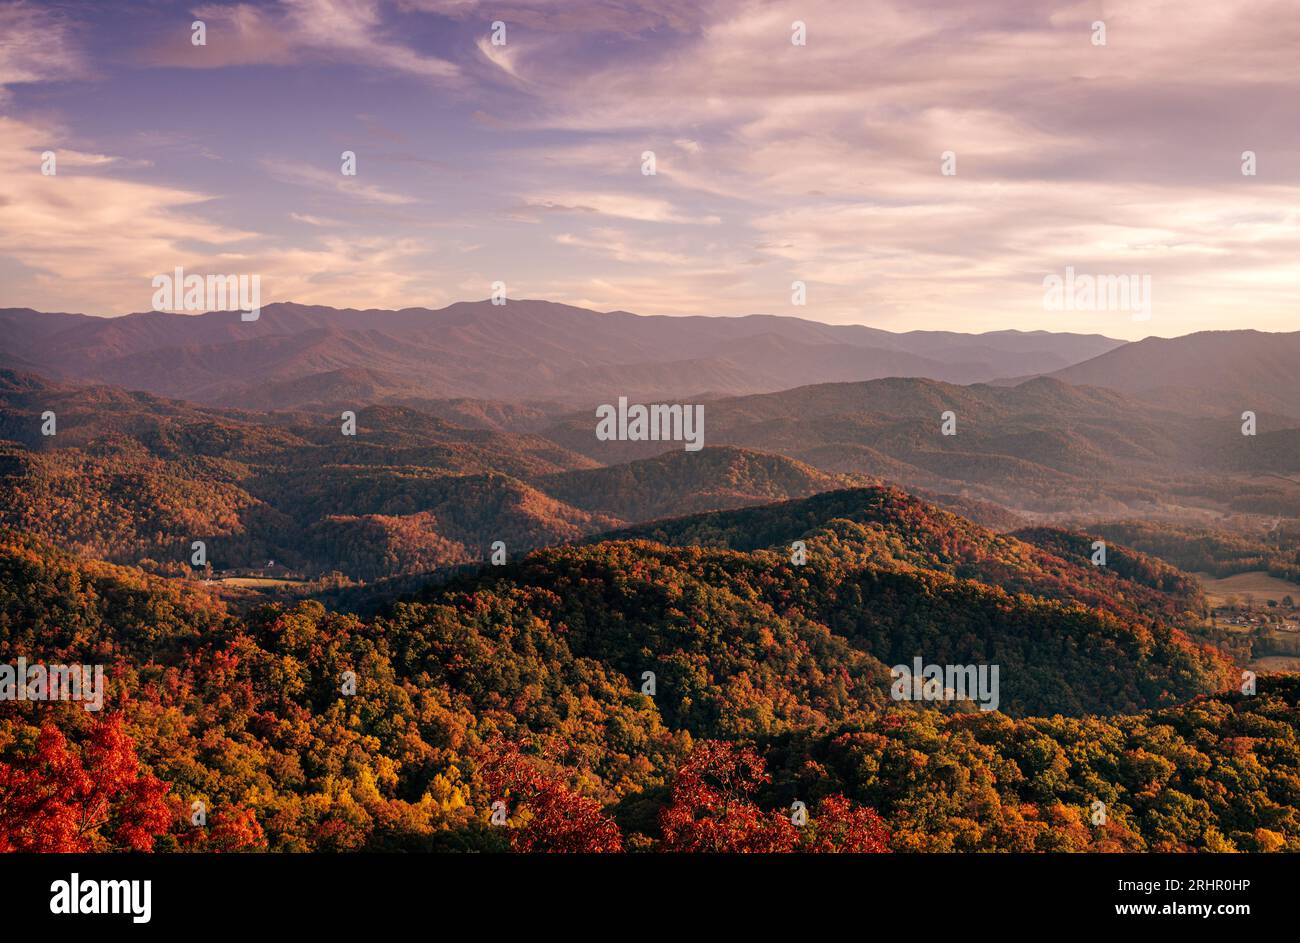 Late afternoon vista from the Foothills Parkway viewed across Townsend.  The tallest mountain in the distance is Thunderhead Mountain in Great Smoky M Stock Photo